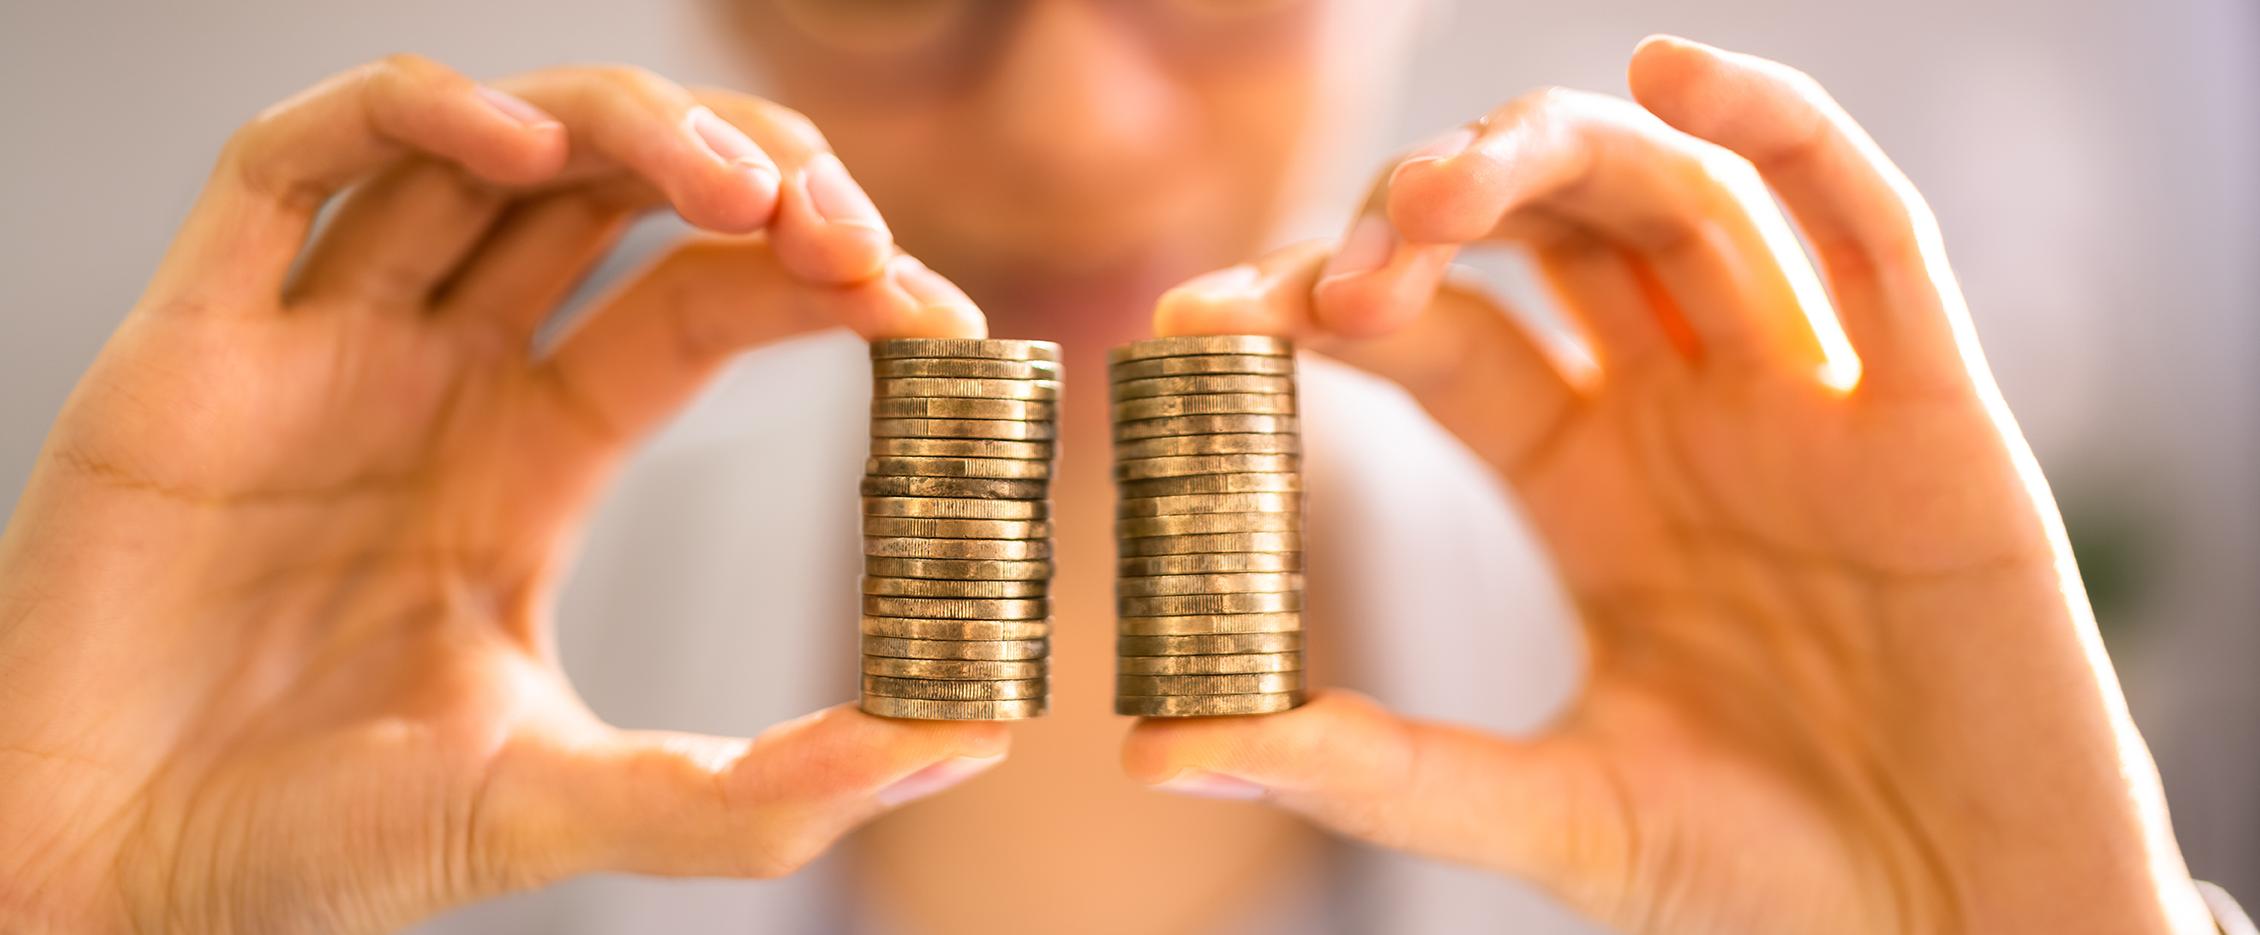 Image of a person holding coins